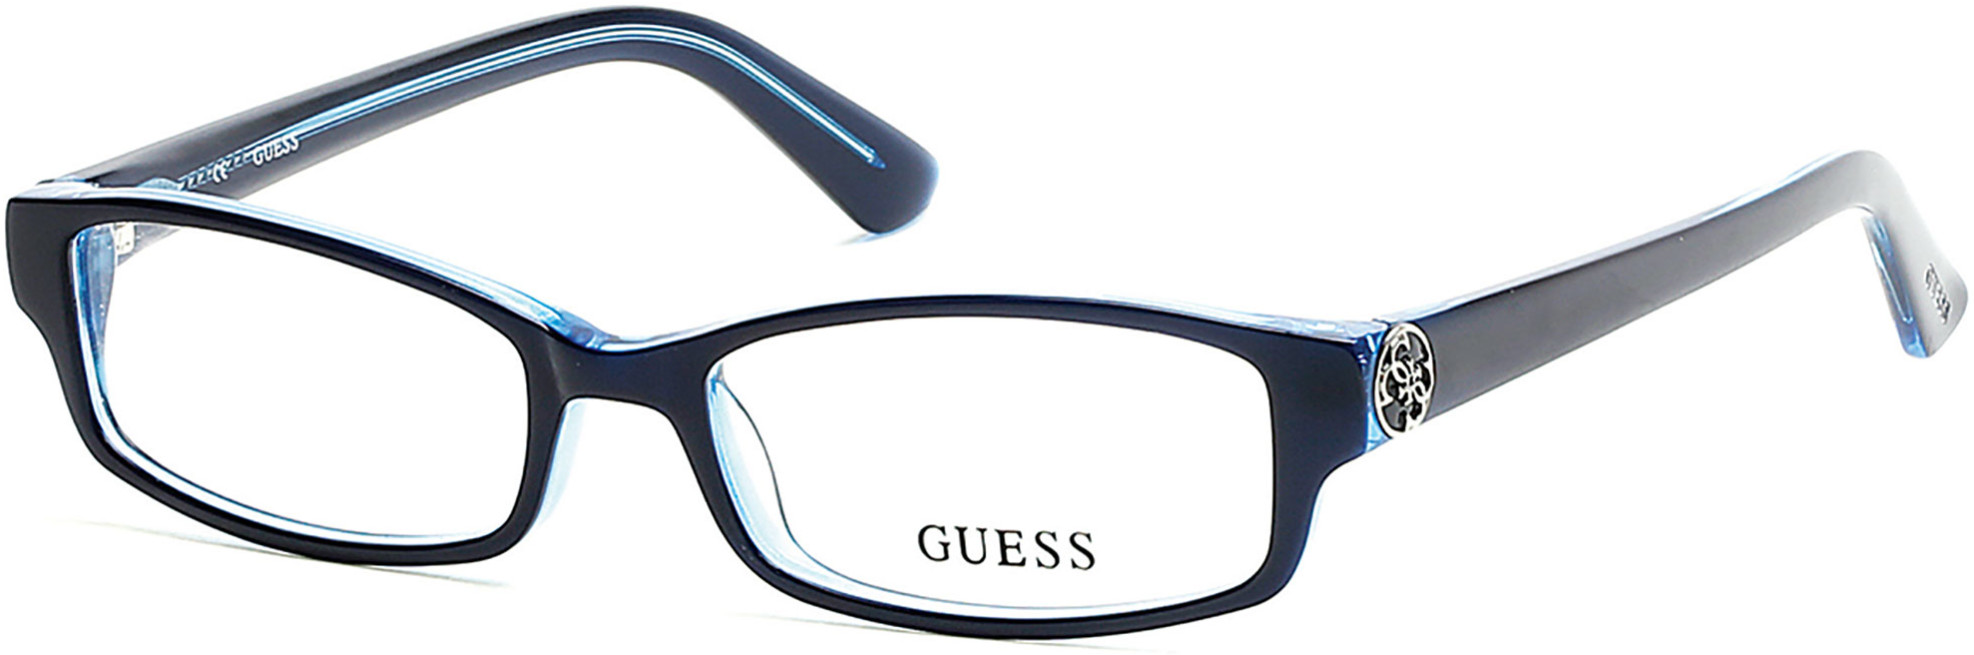 GUESS 2526 090